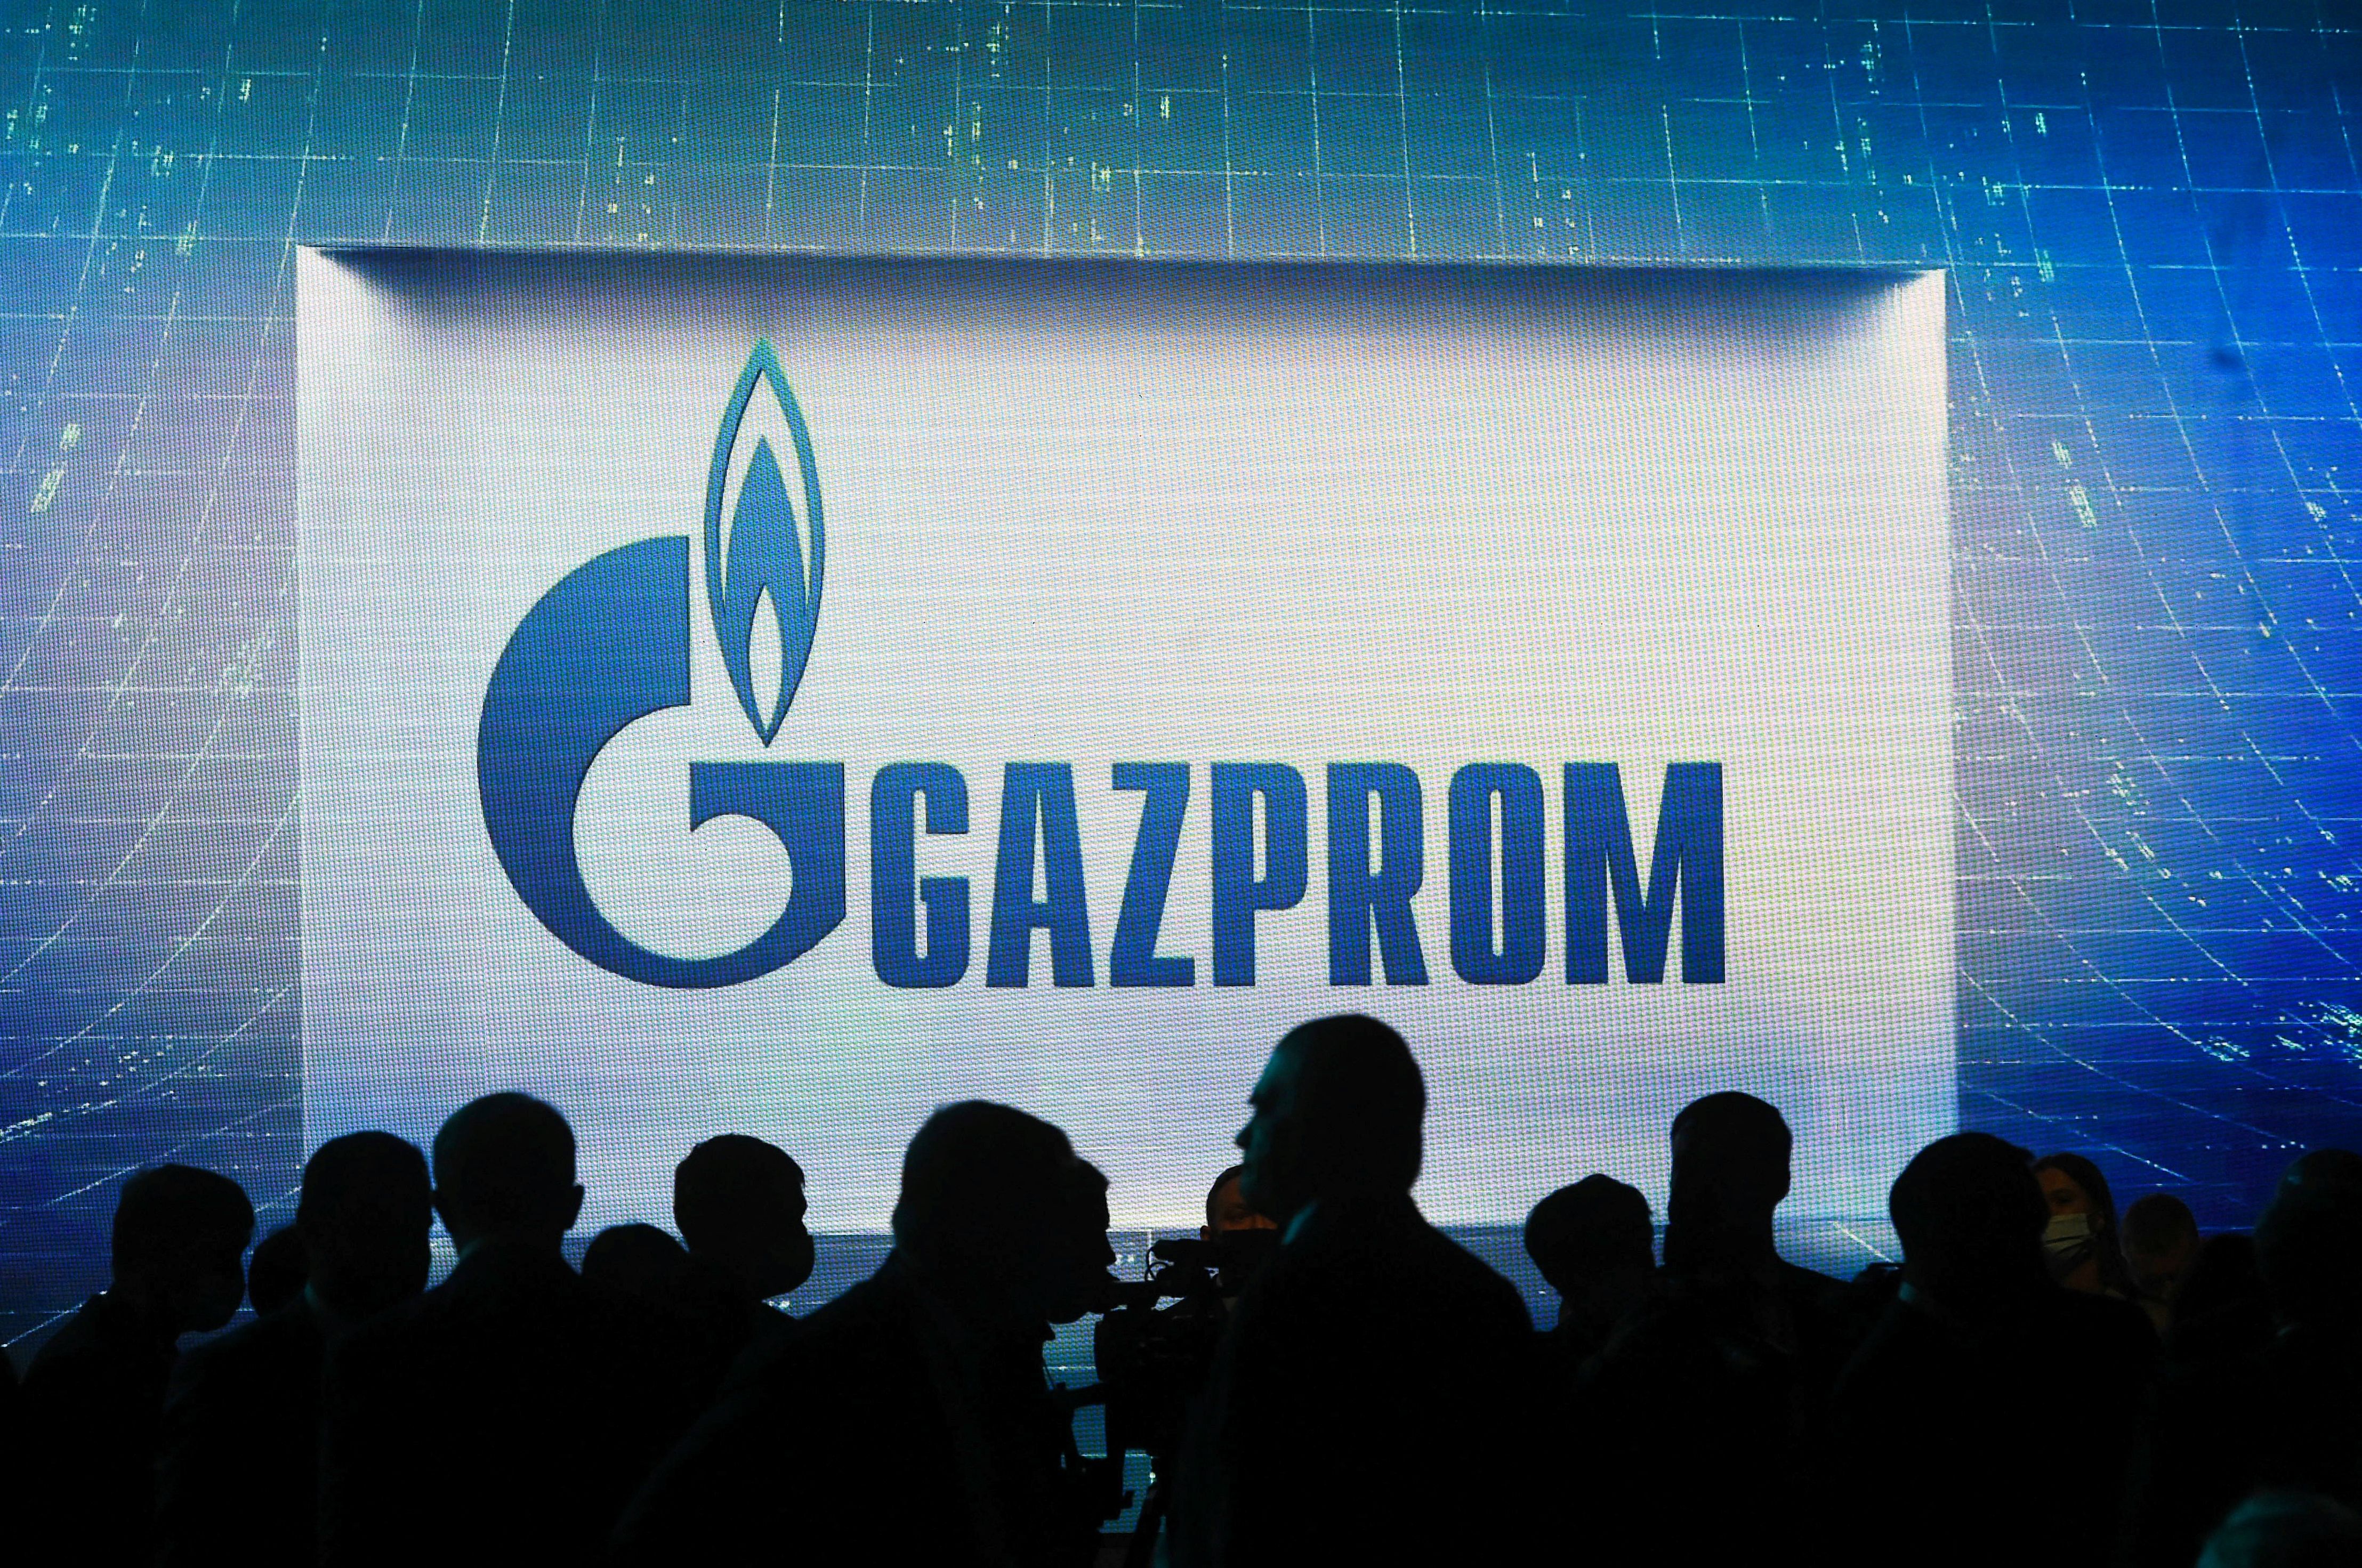 Gazprom is the world’s largest natural gas company and supplies 40 per cent of Europe’s requirements